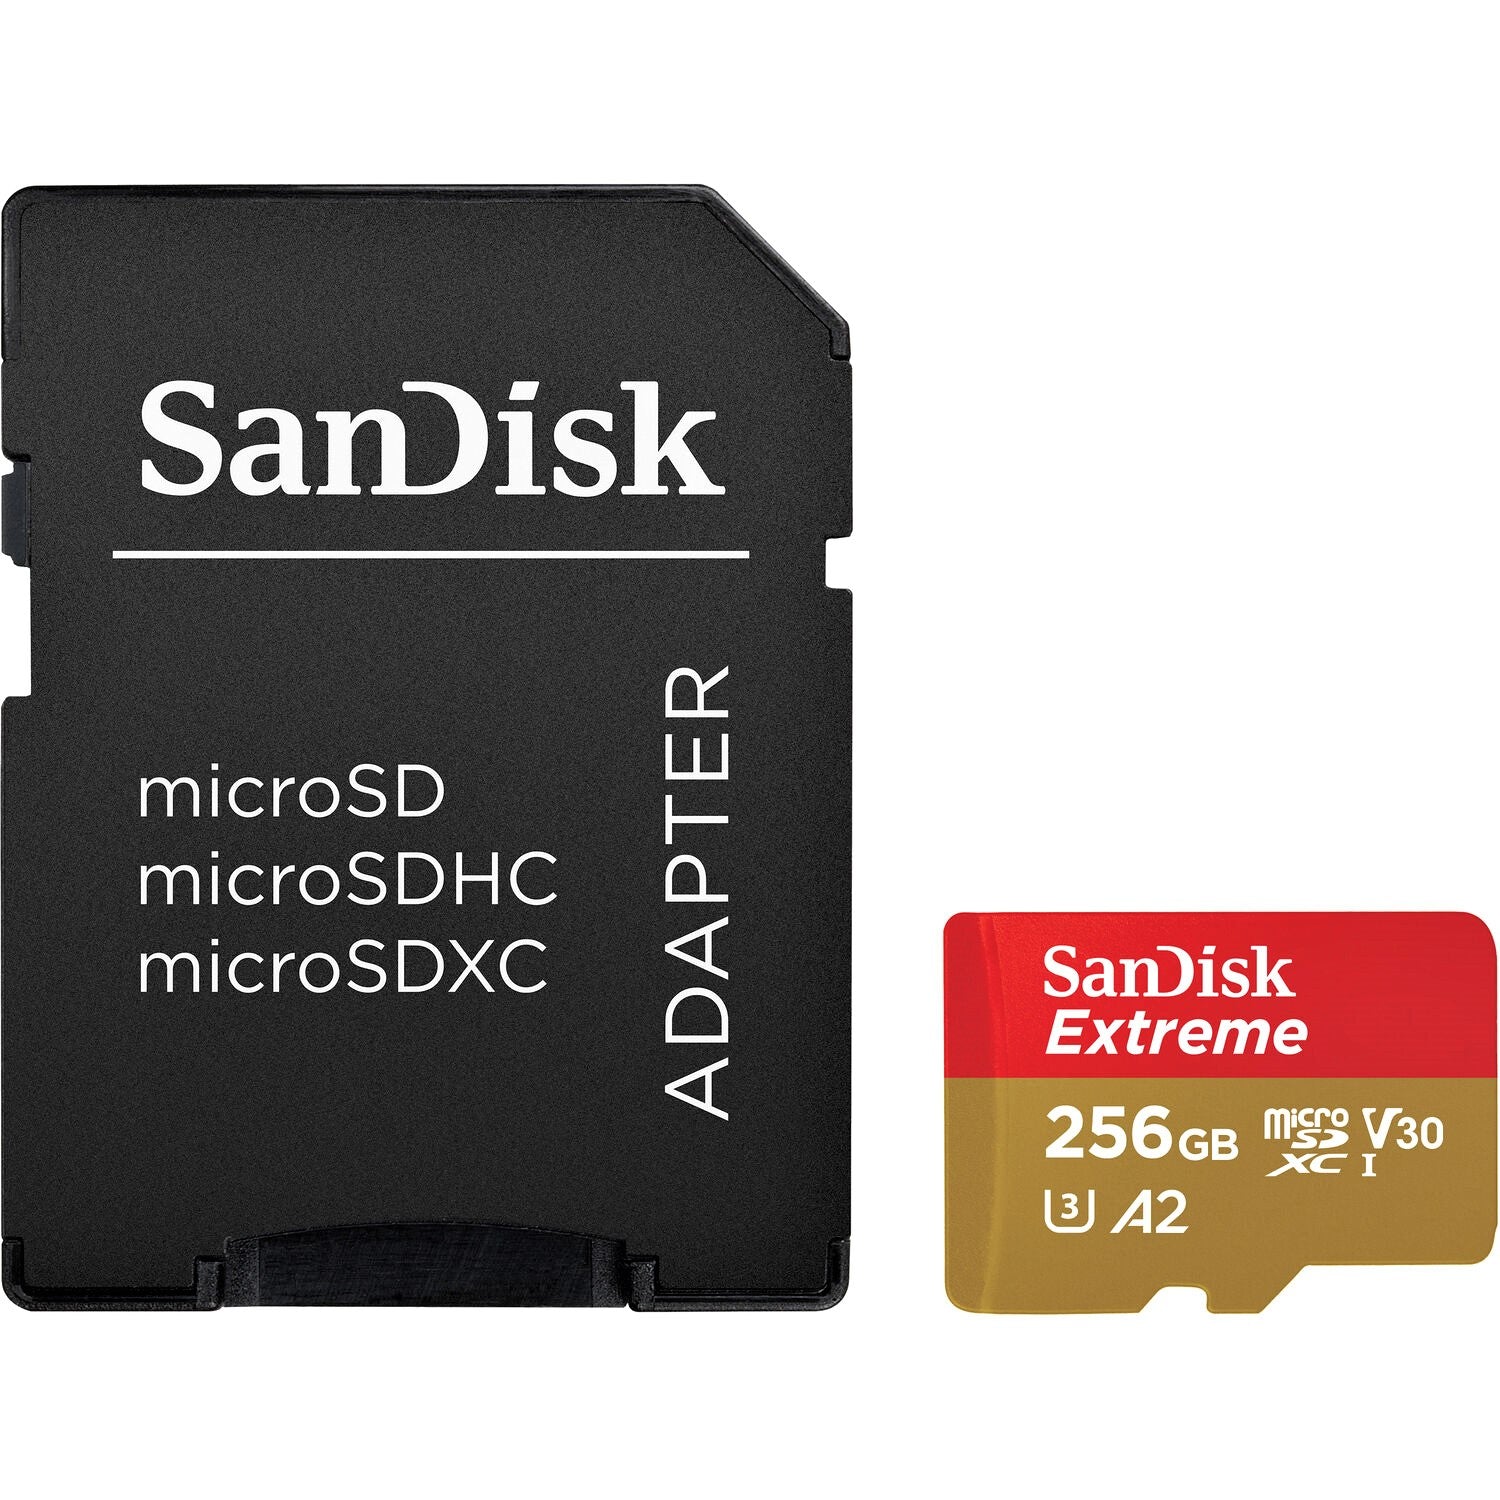 SanDisk 256GB Extreme UHS-I microSDXC Memory Card with SD Adapter